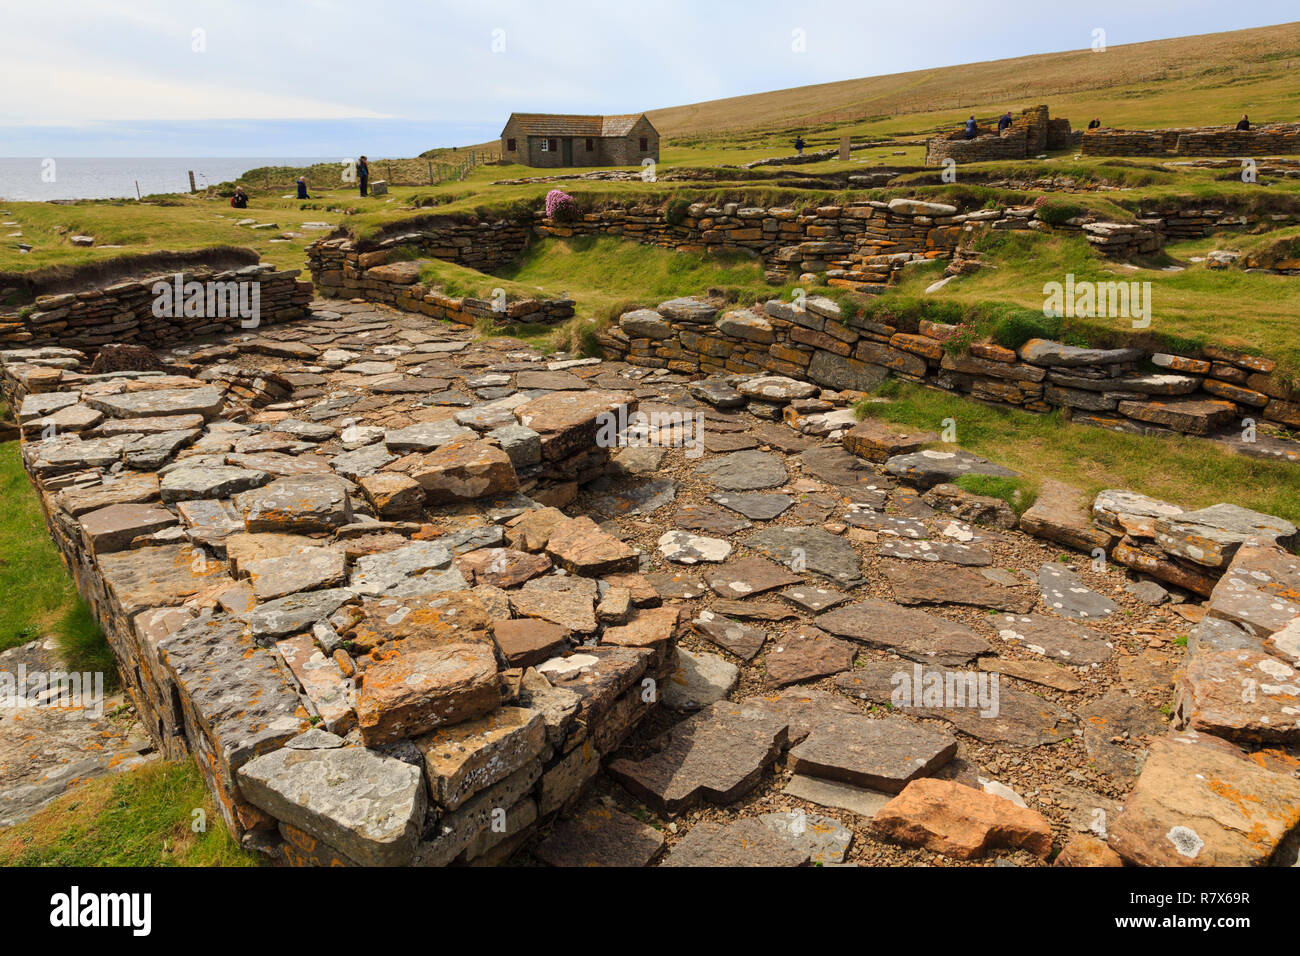 Remains of Norse sauna in a settlement excavated on the Brough of Birsay, Orkney Mainland, Scotland, UK, Great Britain Stock Photo